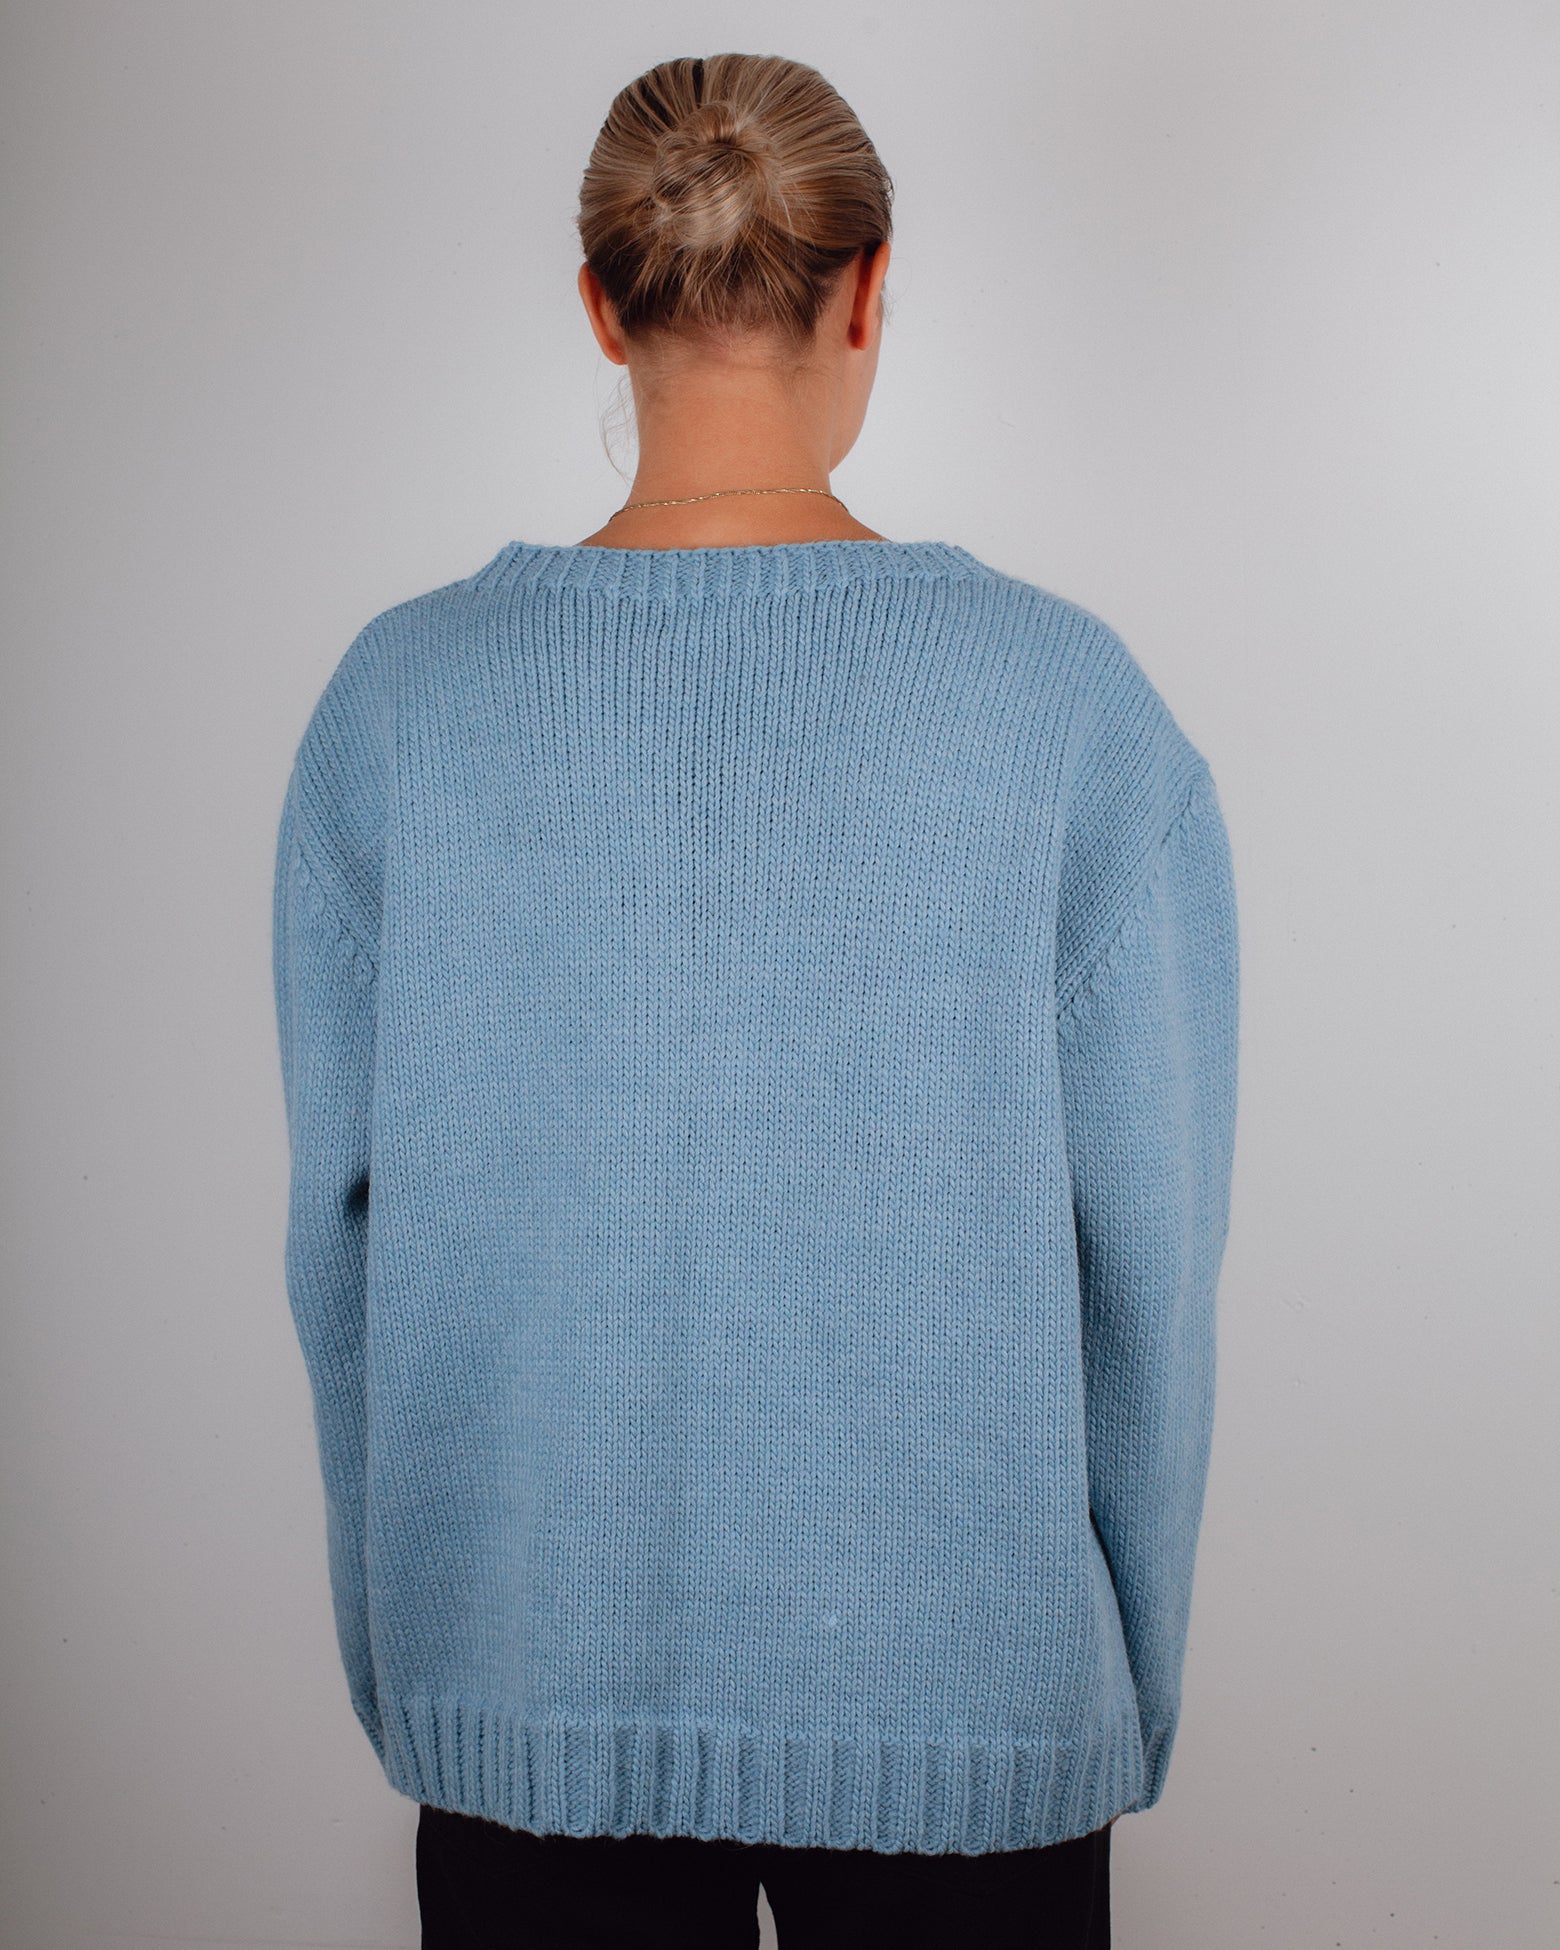 The Sweater Ice Blue